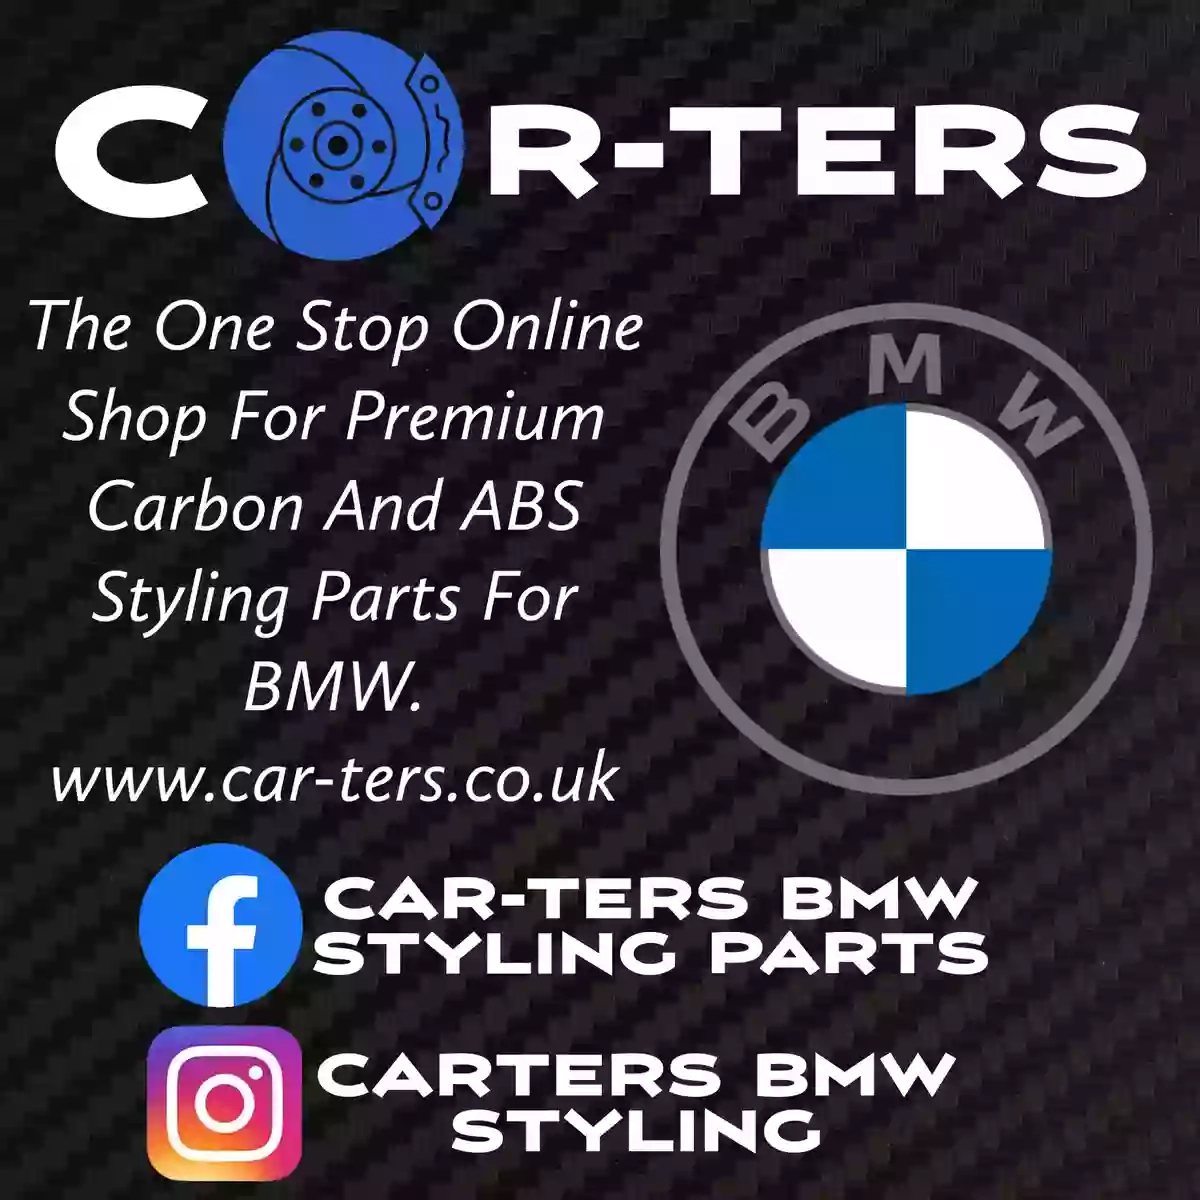 Car-Ters BMW Styling Parts